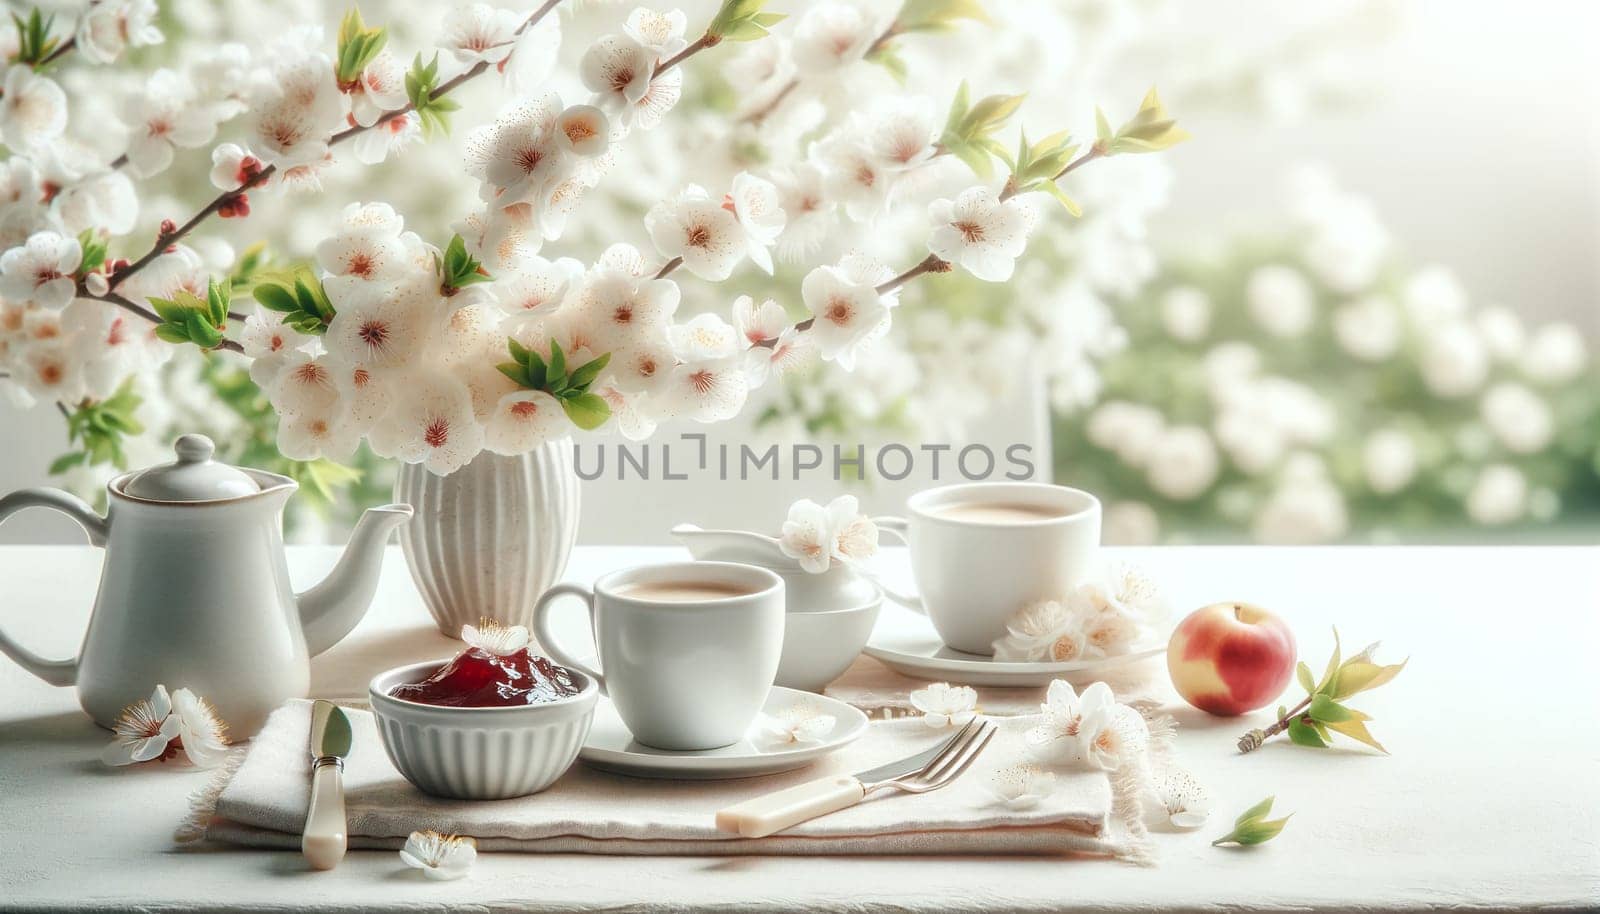 two cups of tea, a teapot and a bowl of berry jelly on a white table in the garden under flowering white branches.